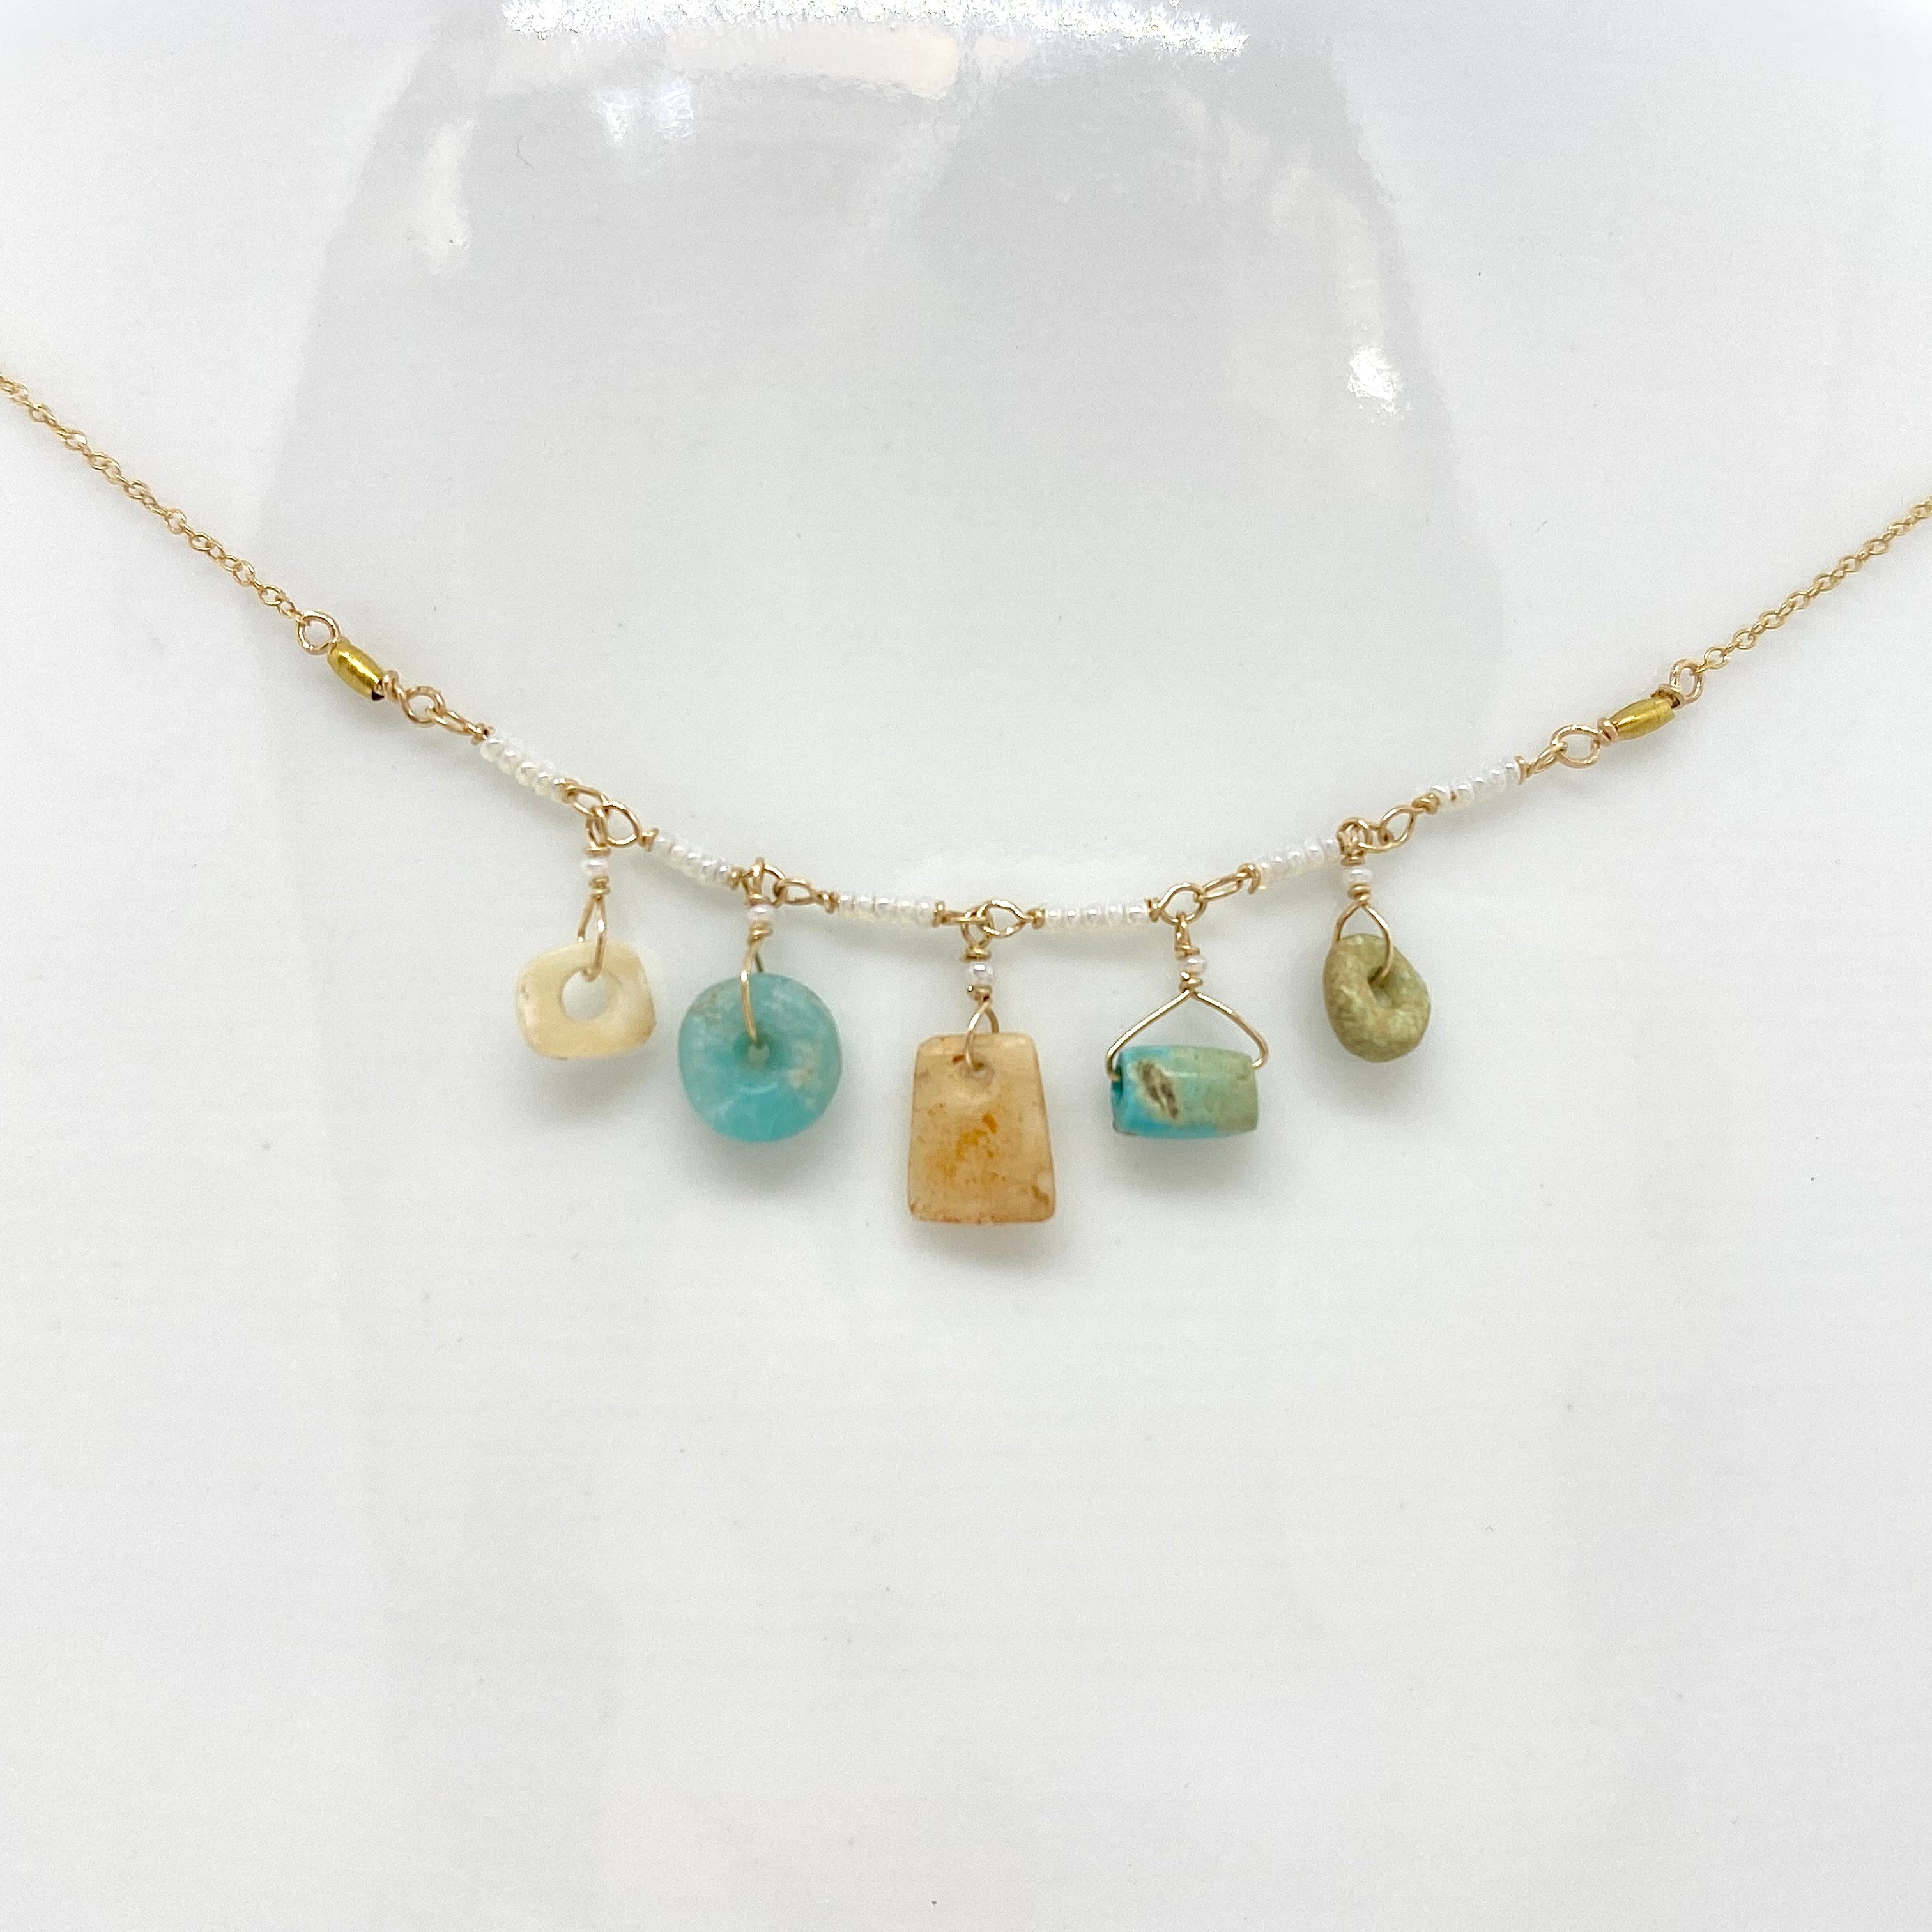 14k Gold Chain Necklace w/ Pre-Columbian Bone, White Jade, Turquoise, Chrysoprase, 18k Gold Nuggets & Antique Italian Beads